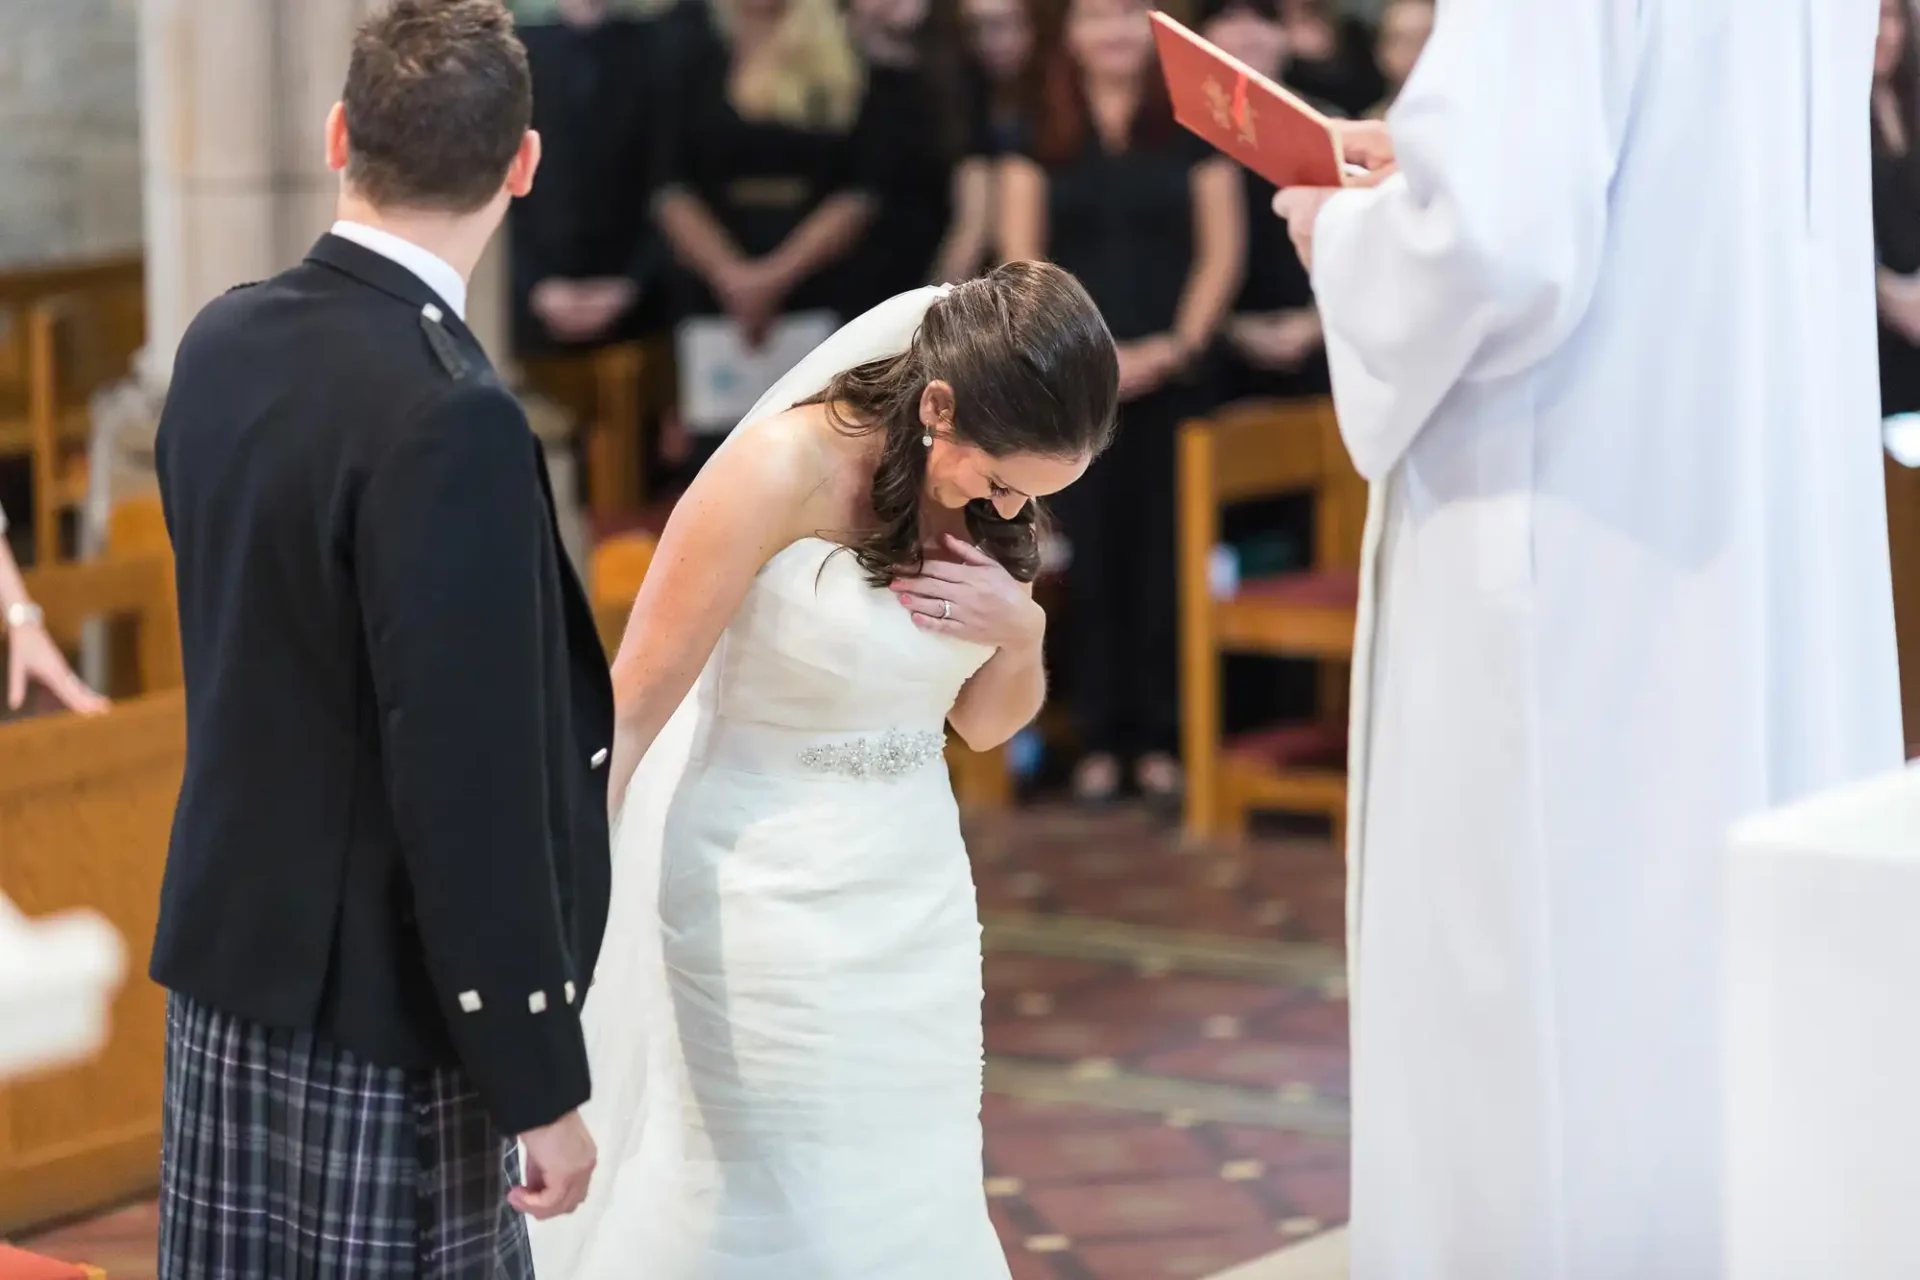 Bride in a white dress bowing her head during a church wedding ceremony, standing next to a groom in a kilt, with a priest and attendees in the background.